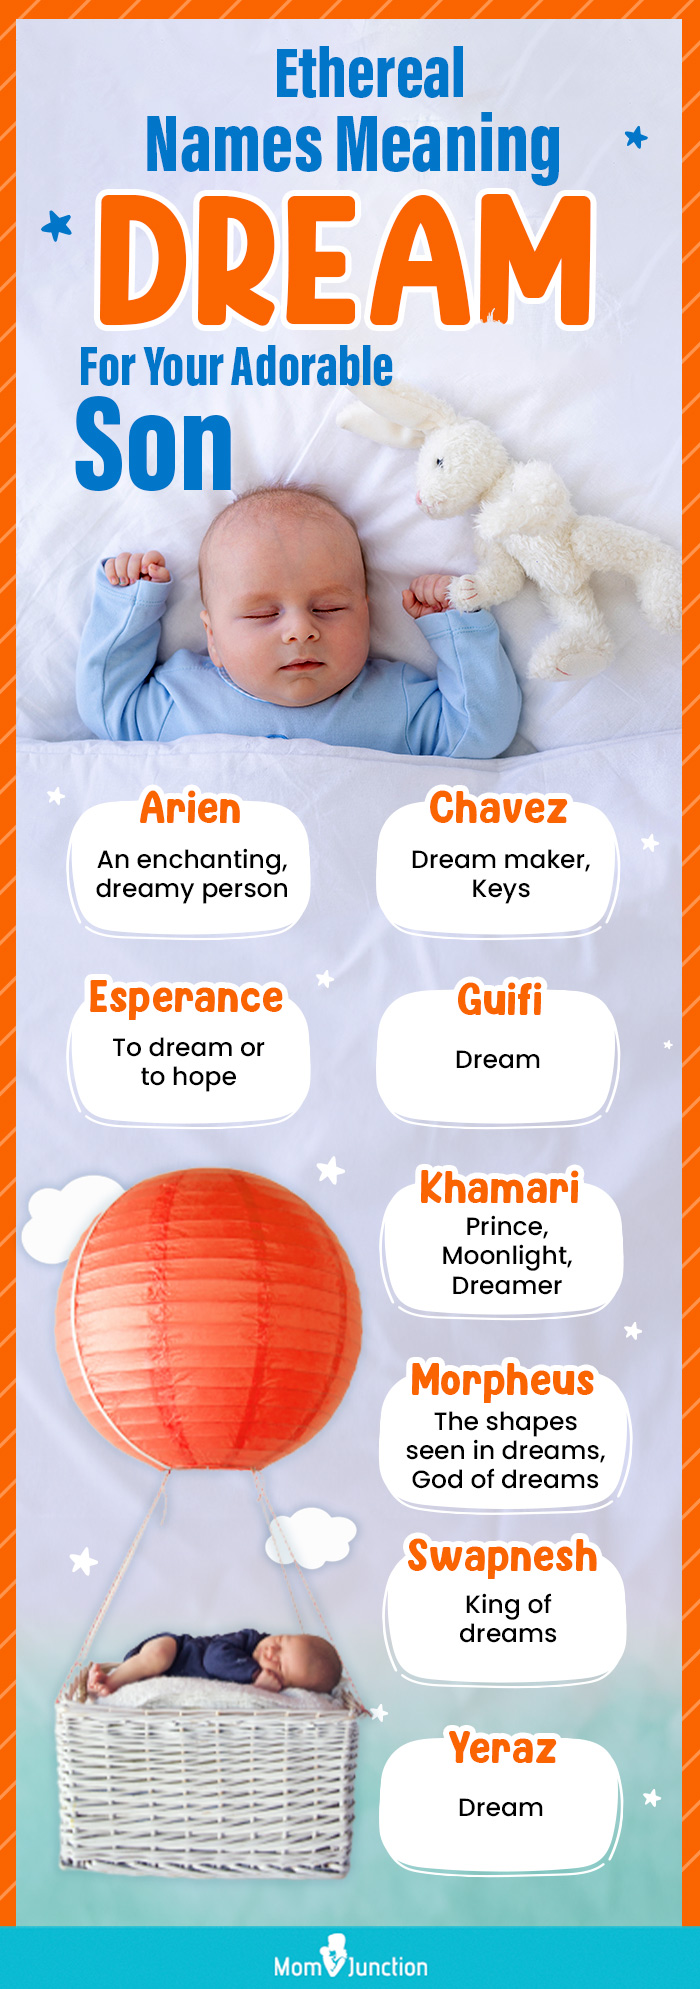 Ethereal Names Meaning Dream For Your Adorable Son (infographic)